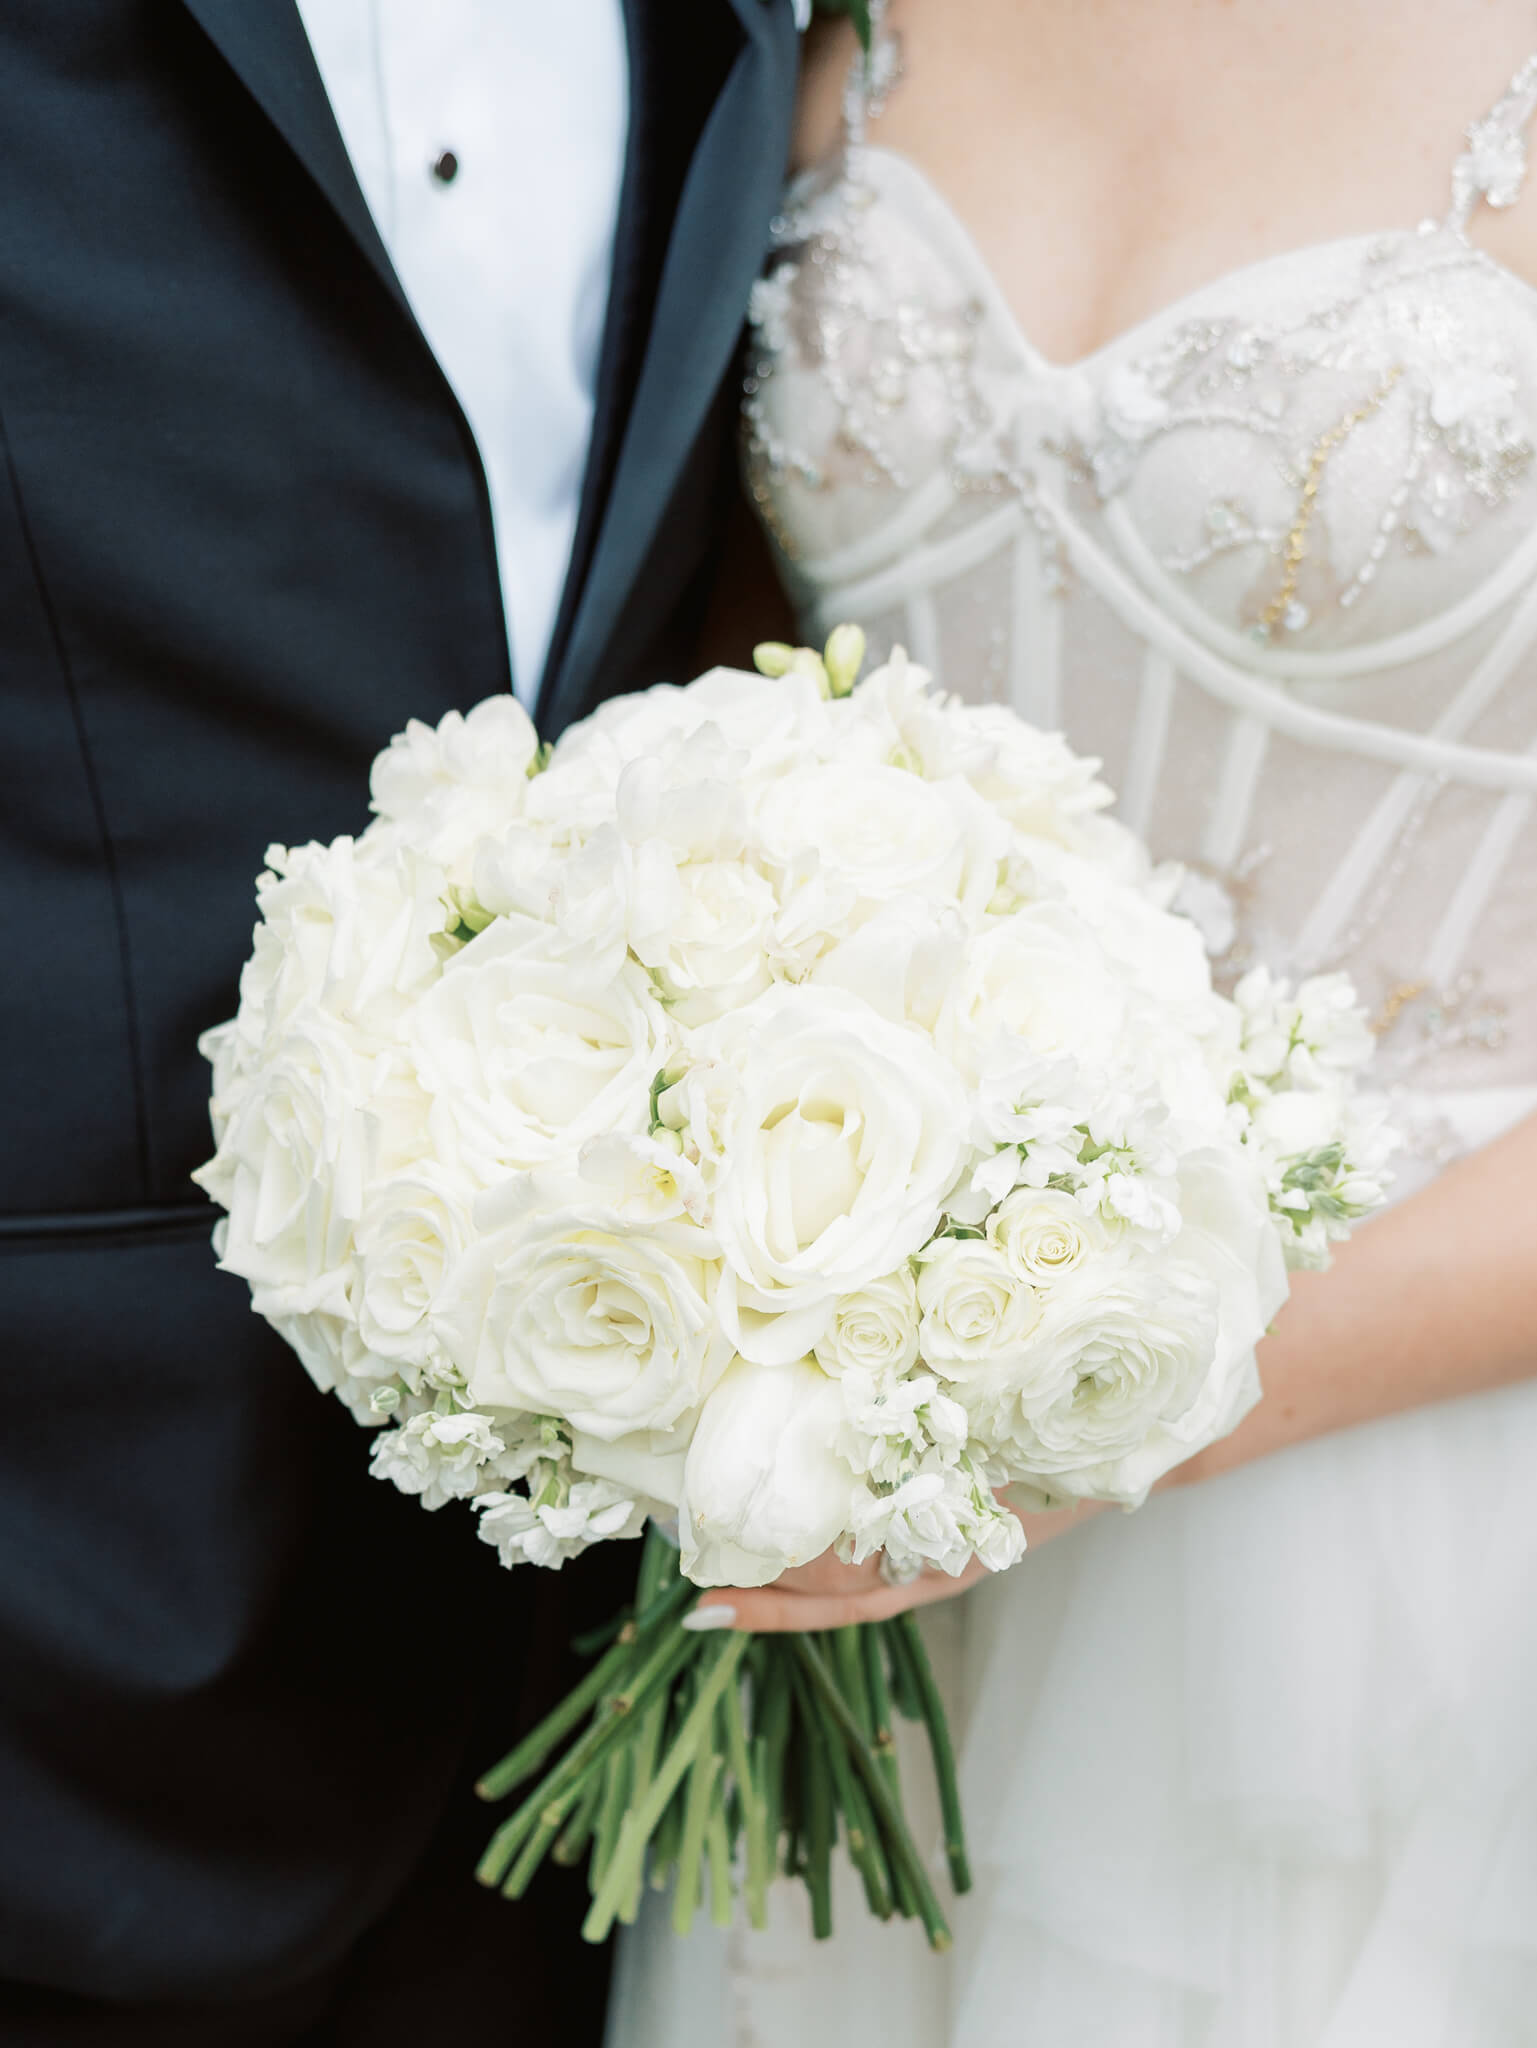 Closeup of a bride and groom standing together and holding a bouquet of white flowers